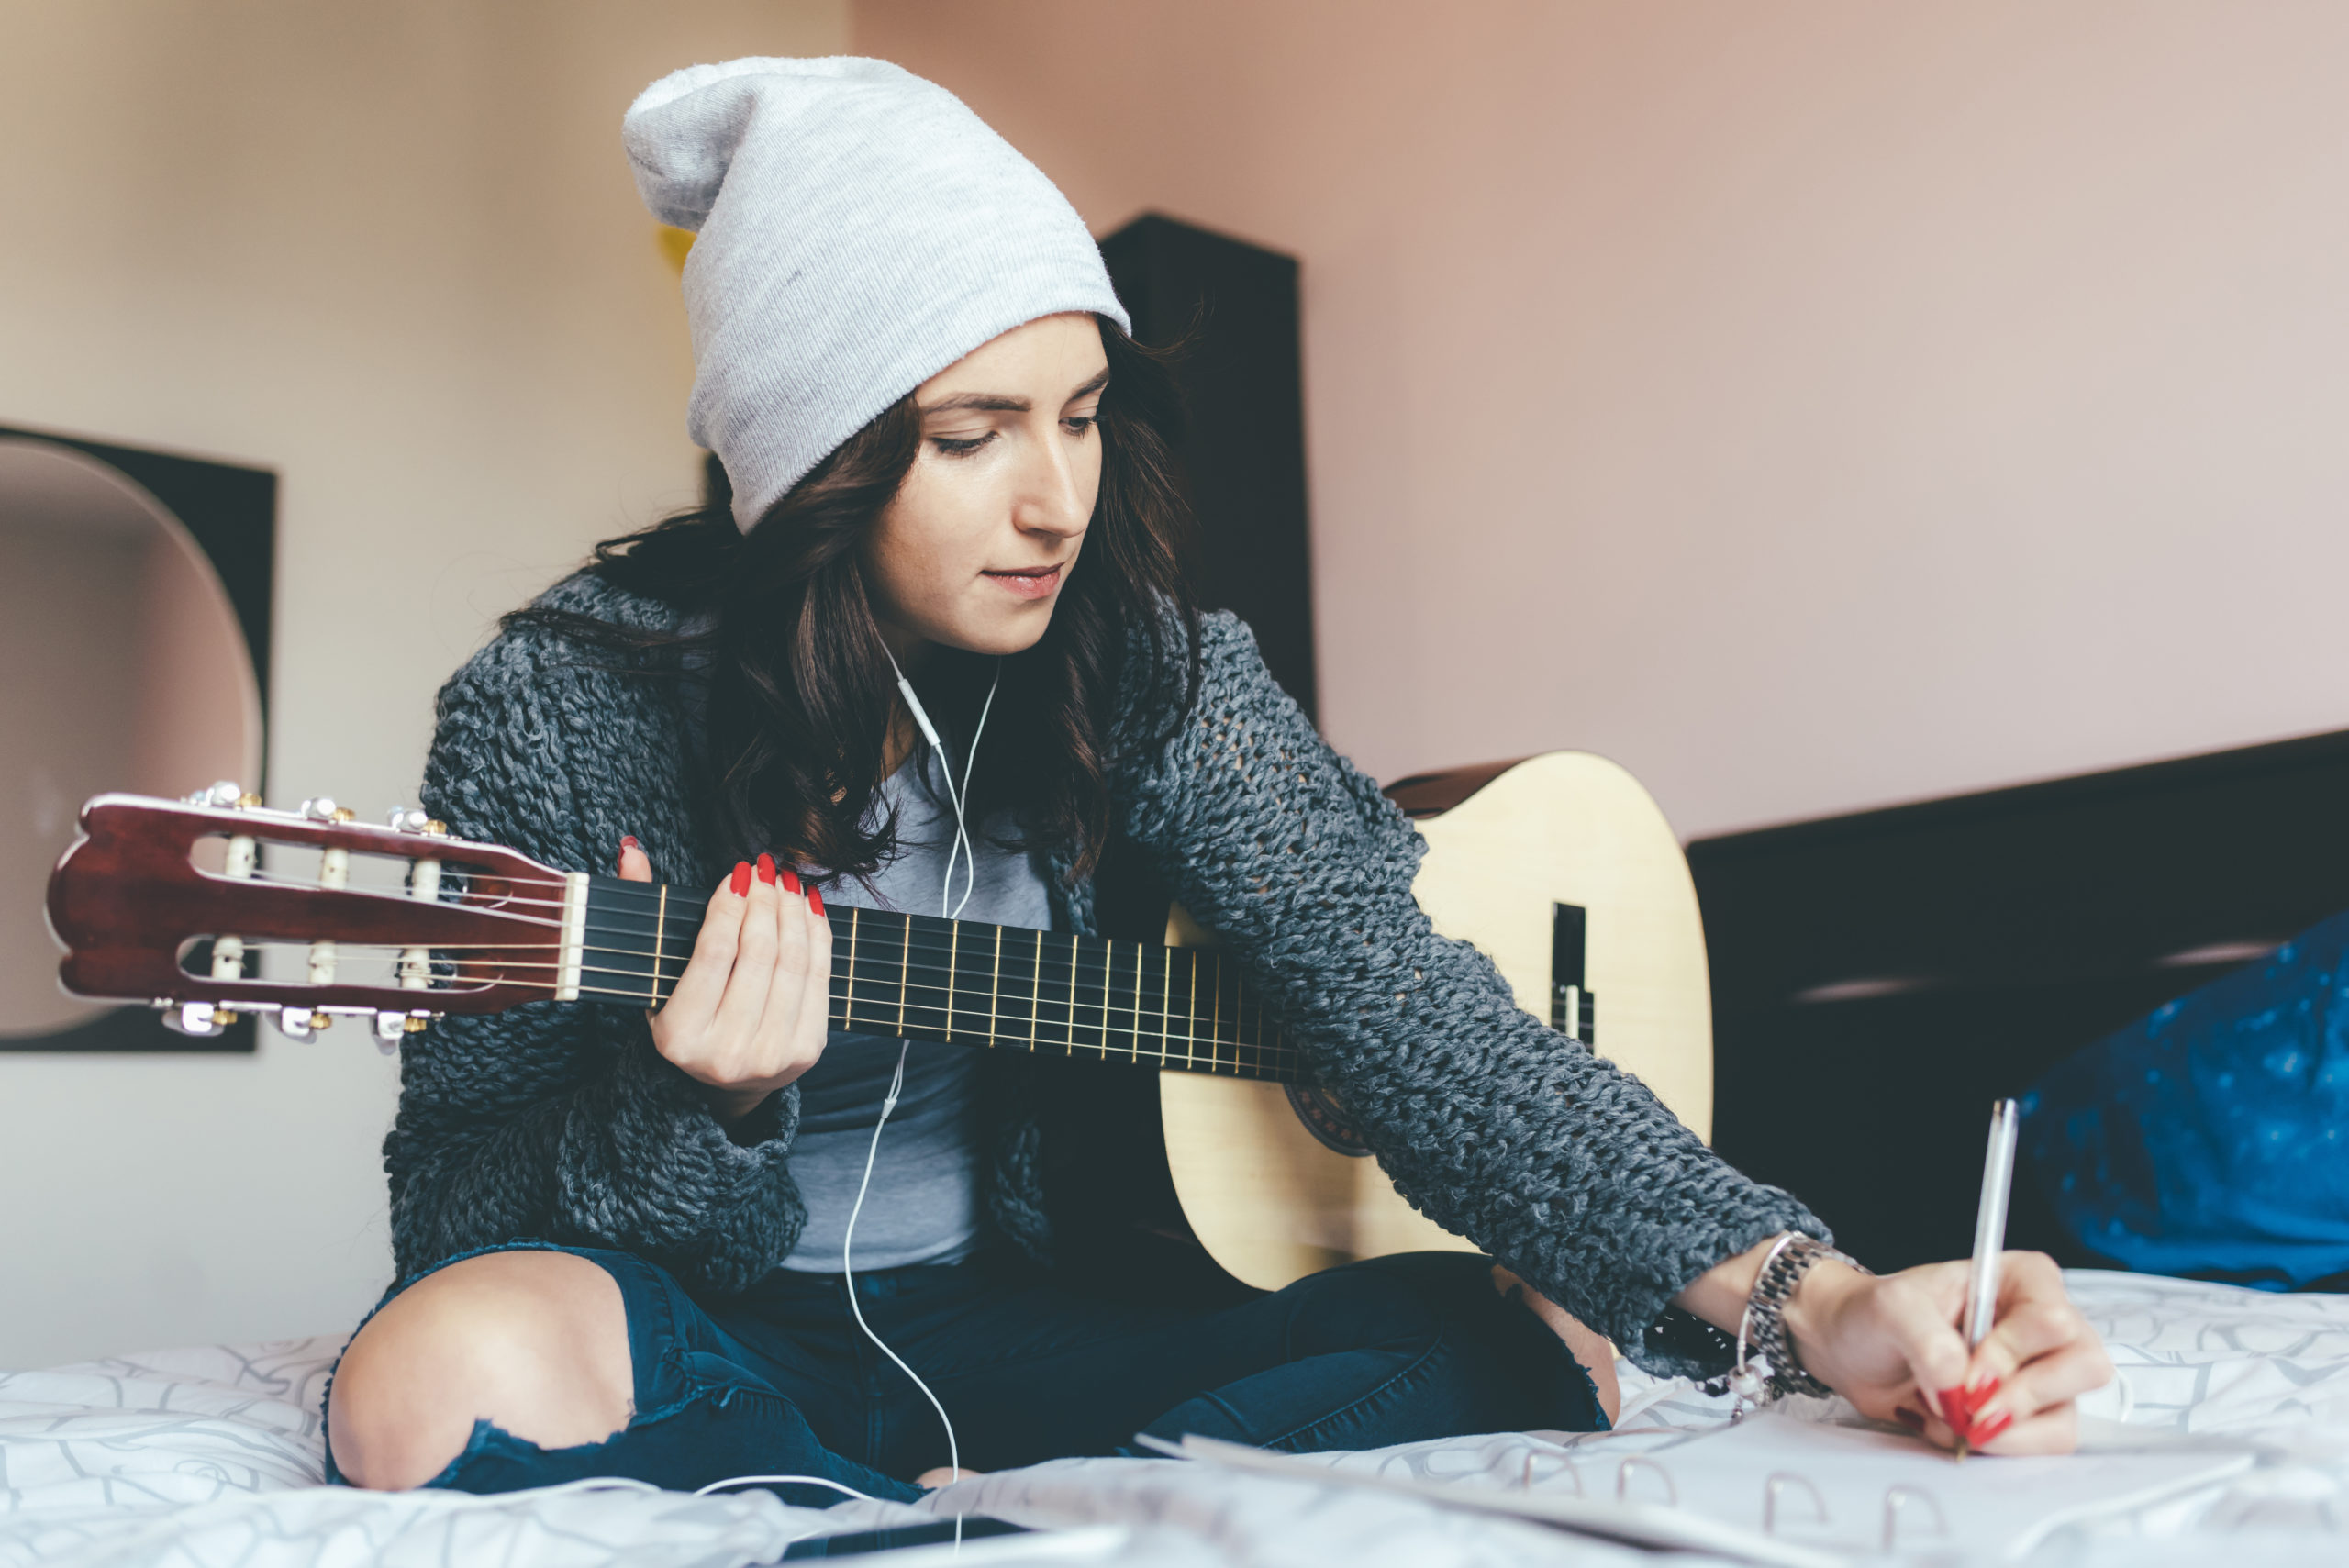 image of young woman holding guitar and composing music | Colorado guitar lessons adults youth